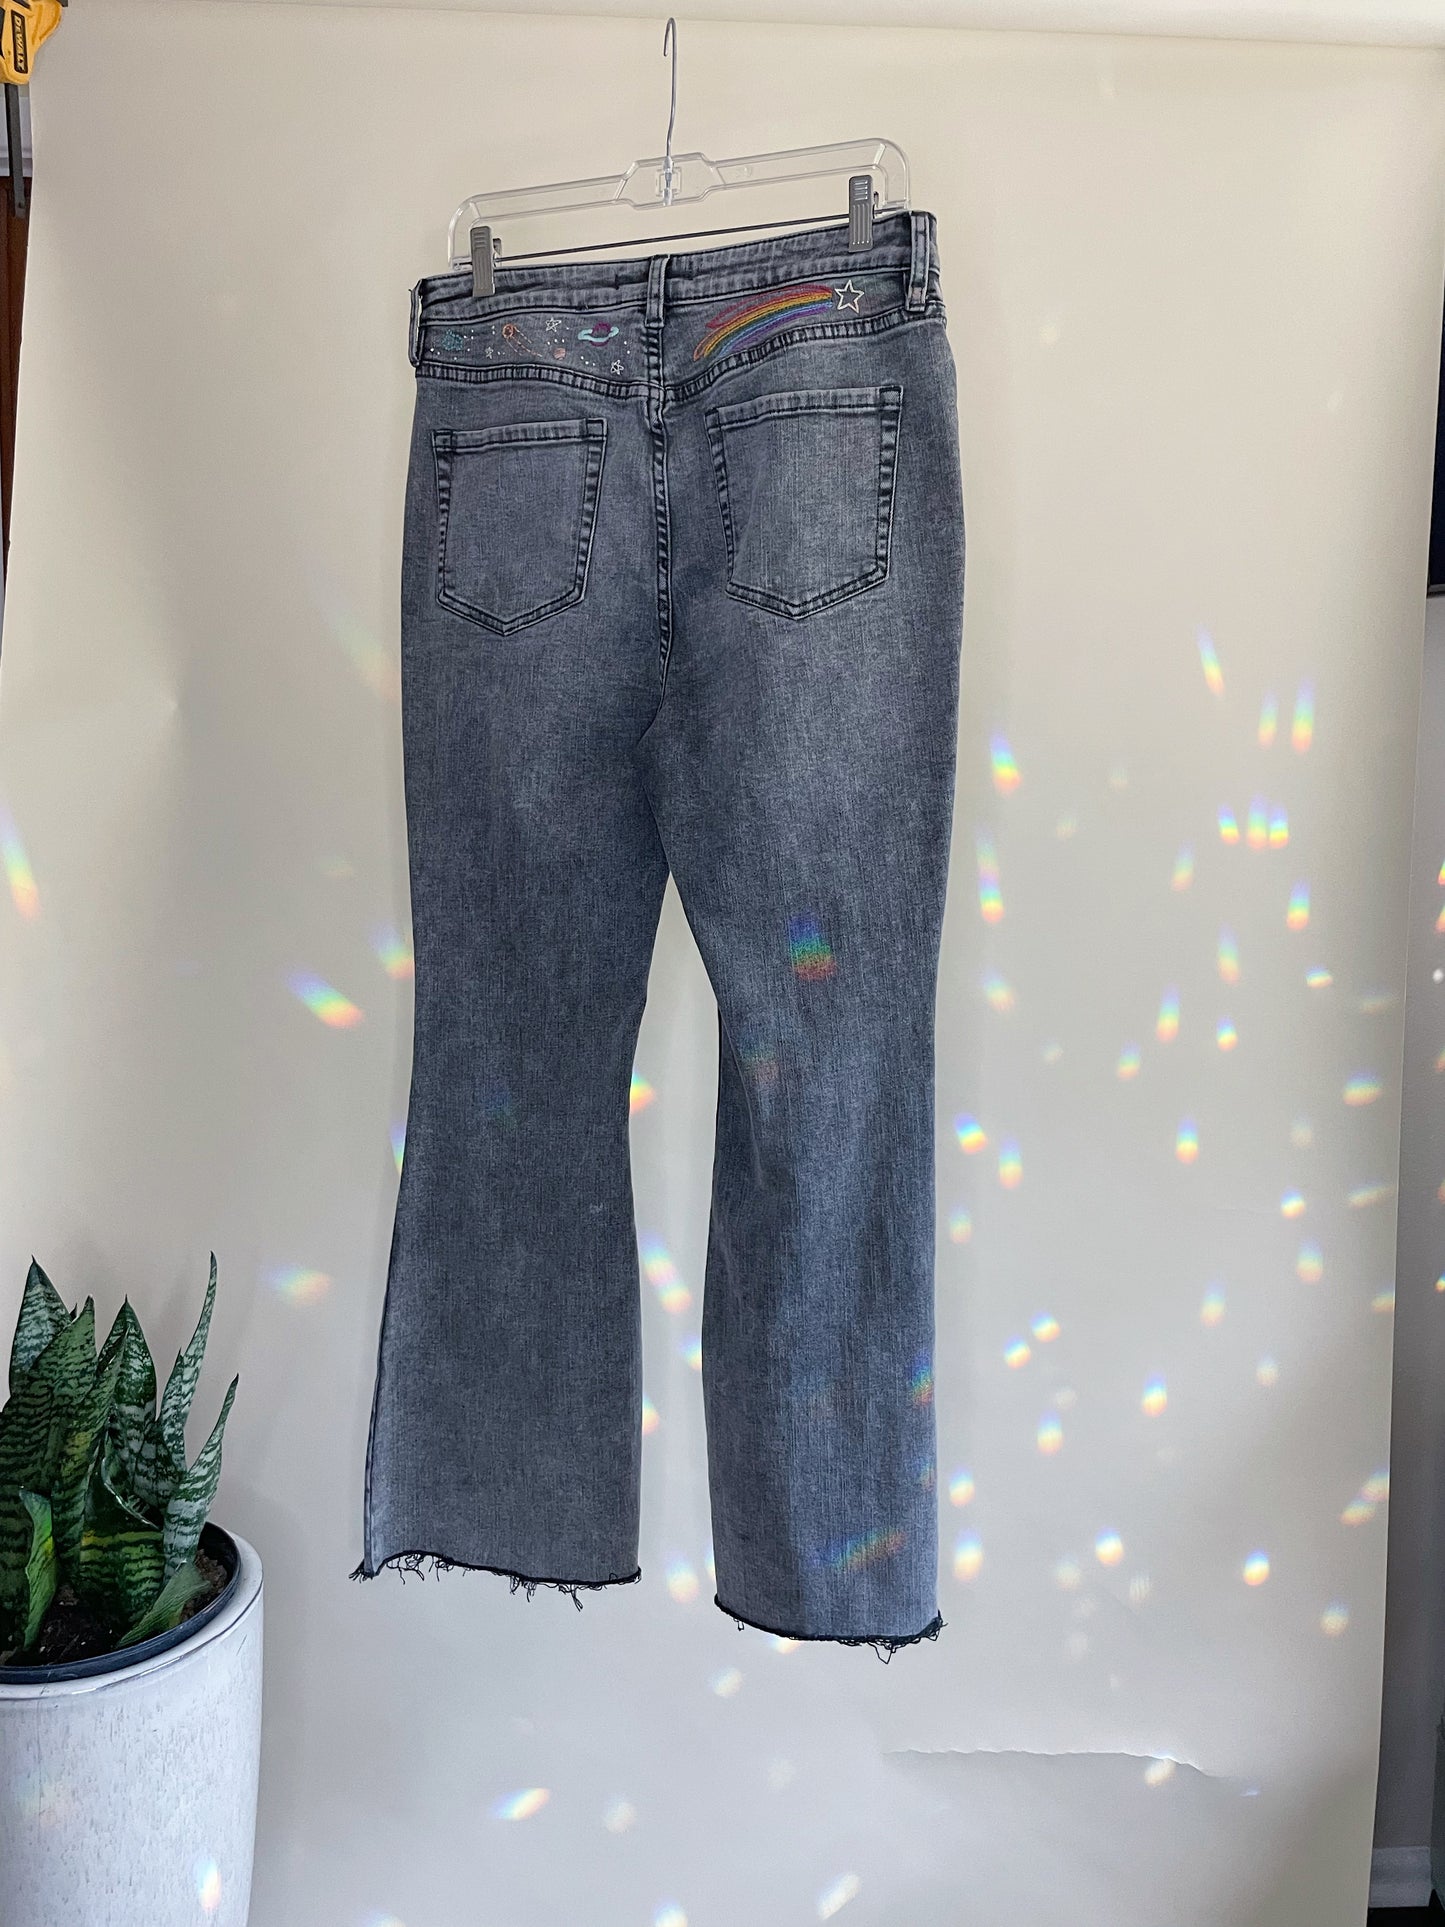 30 Waist Free People Cosmically Embroidered Jeans- M/Lg